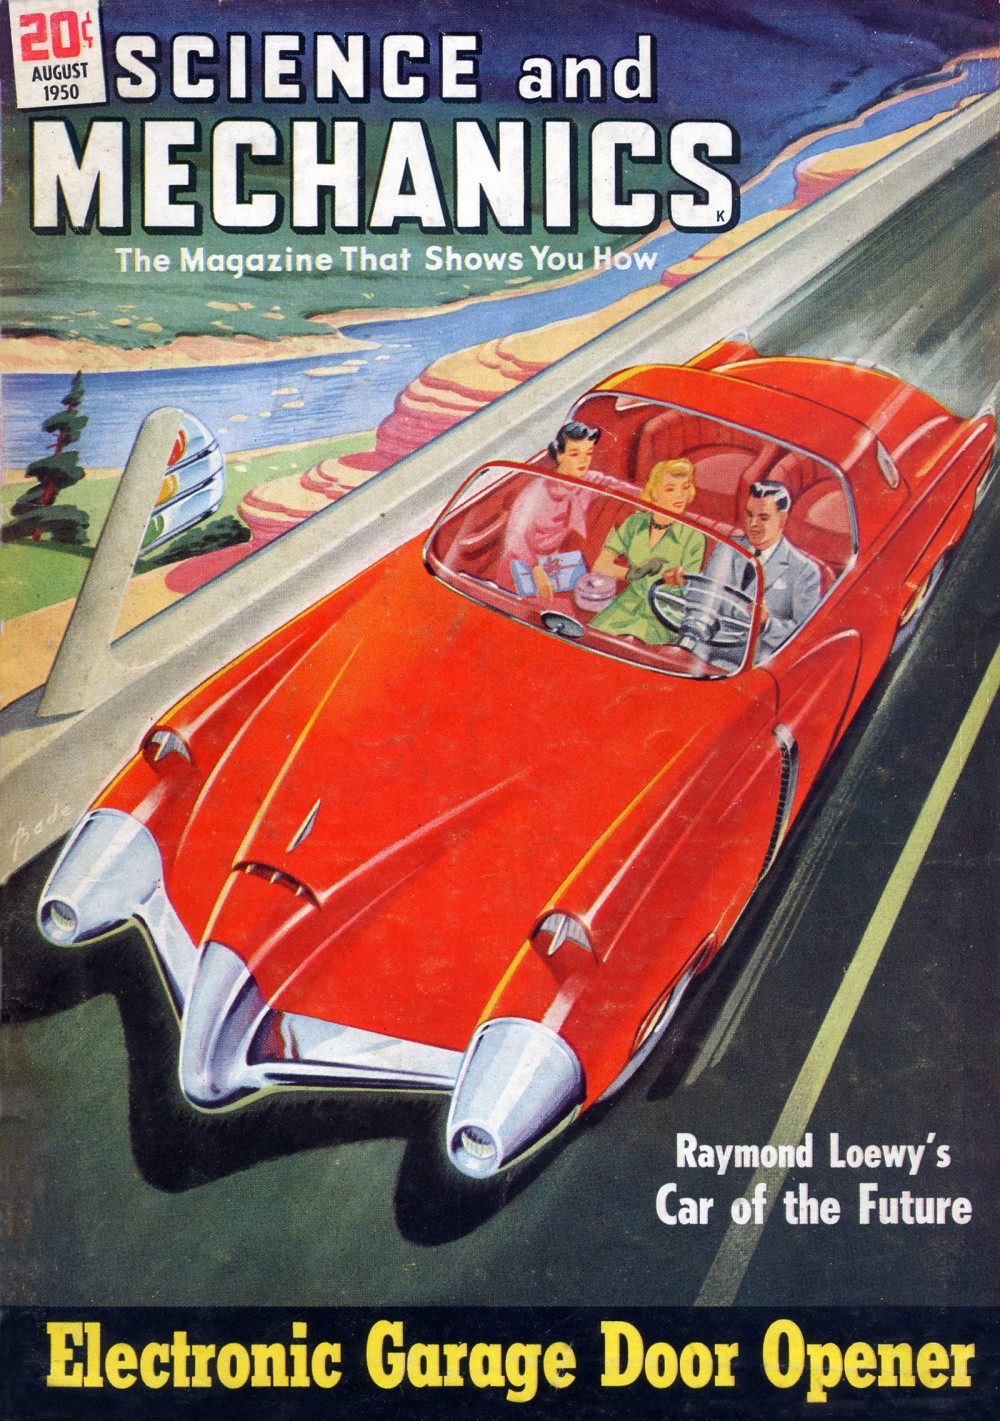 The cover of Science and Mechanics. It features a drawing of a man and two women in a sleek red convertible. The headlines are Electronic Garage Door Opener and Raymond Loewy's Car of the Future.